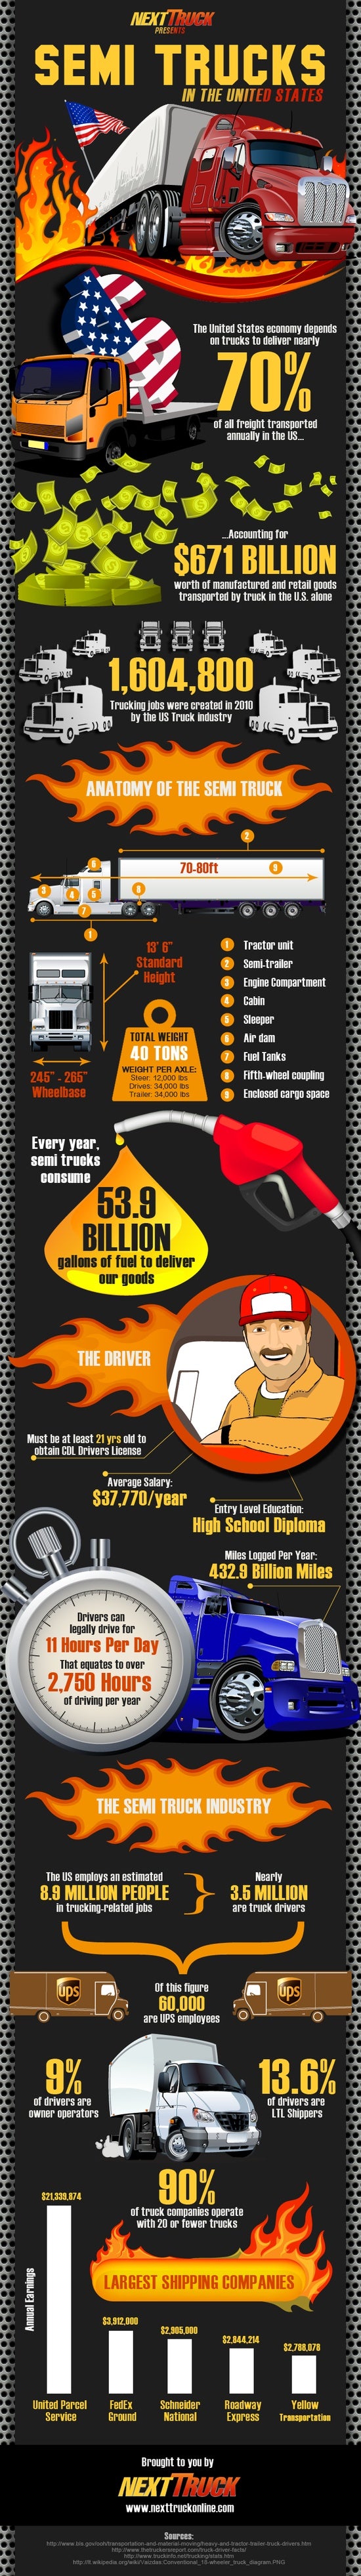 Interesting Trucking Industry Infographic for Truckers